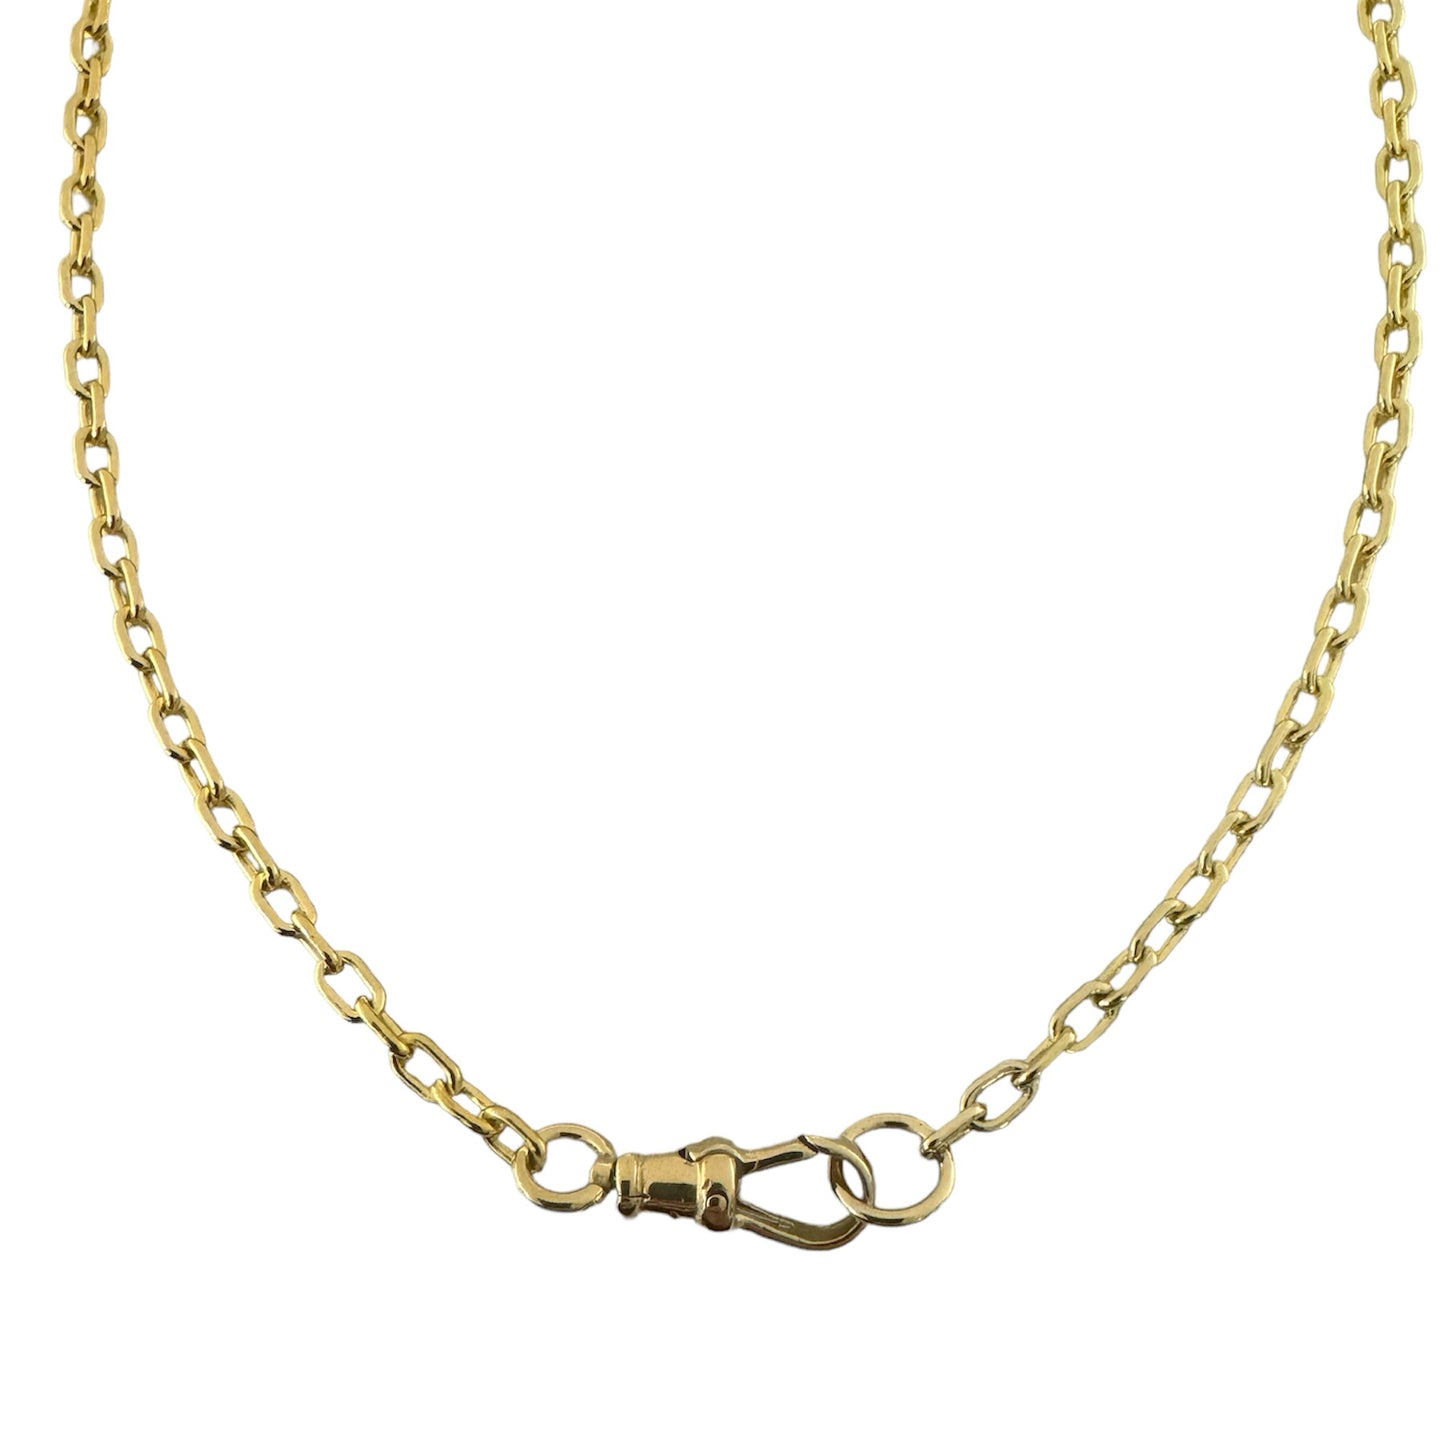 Solid Oval Link Gold Watch Chain Necklace